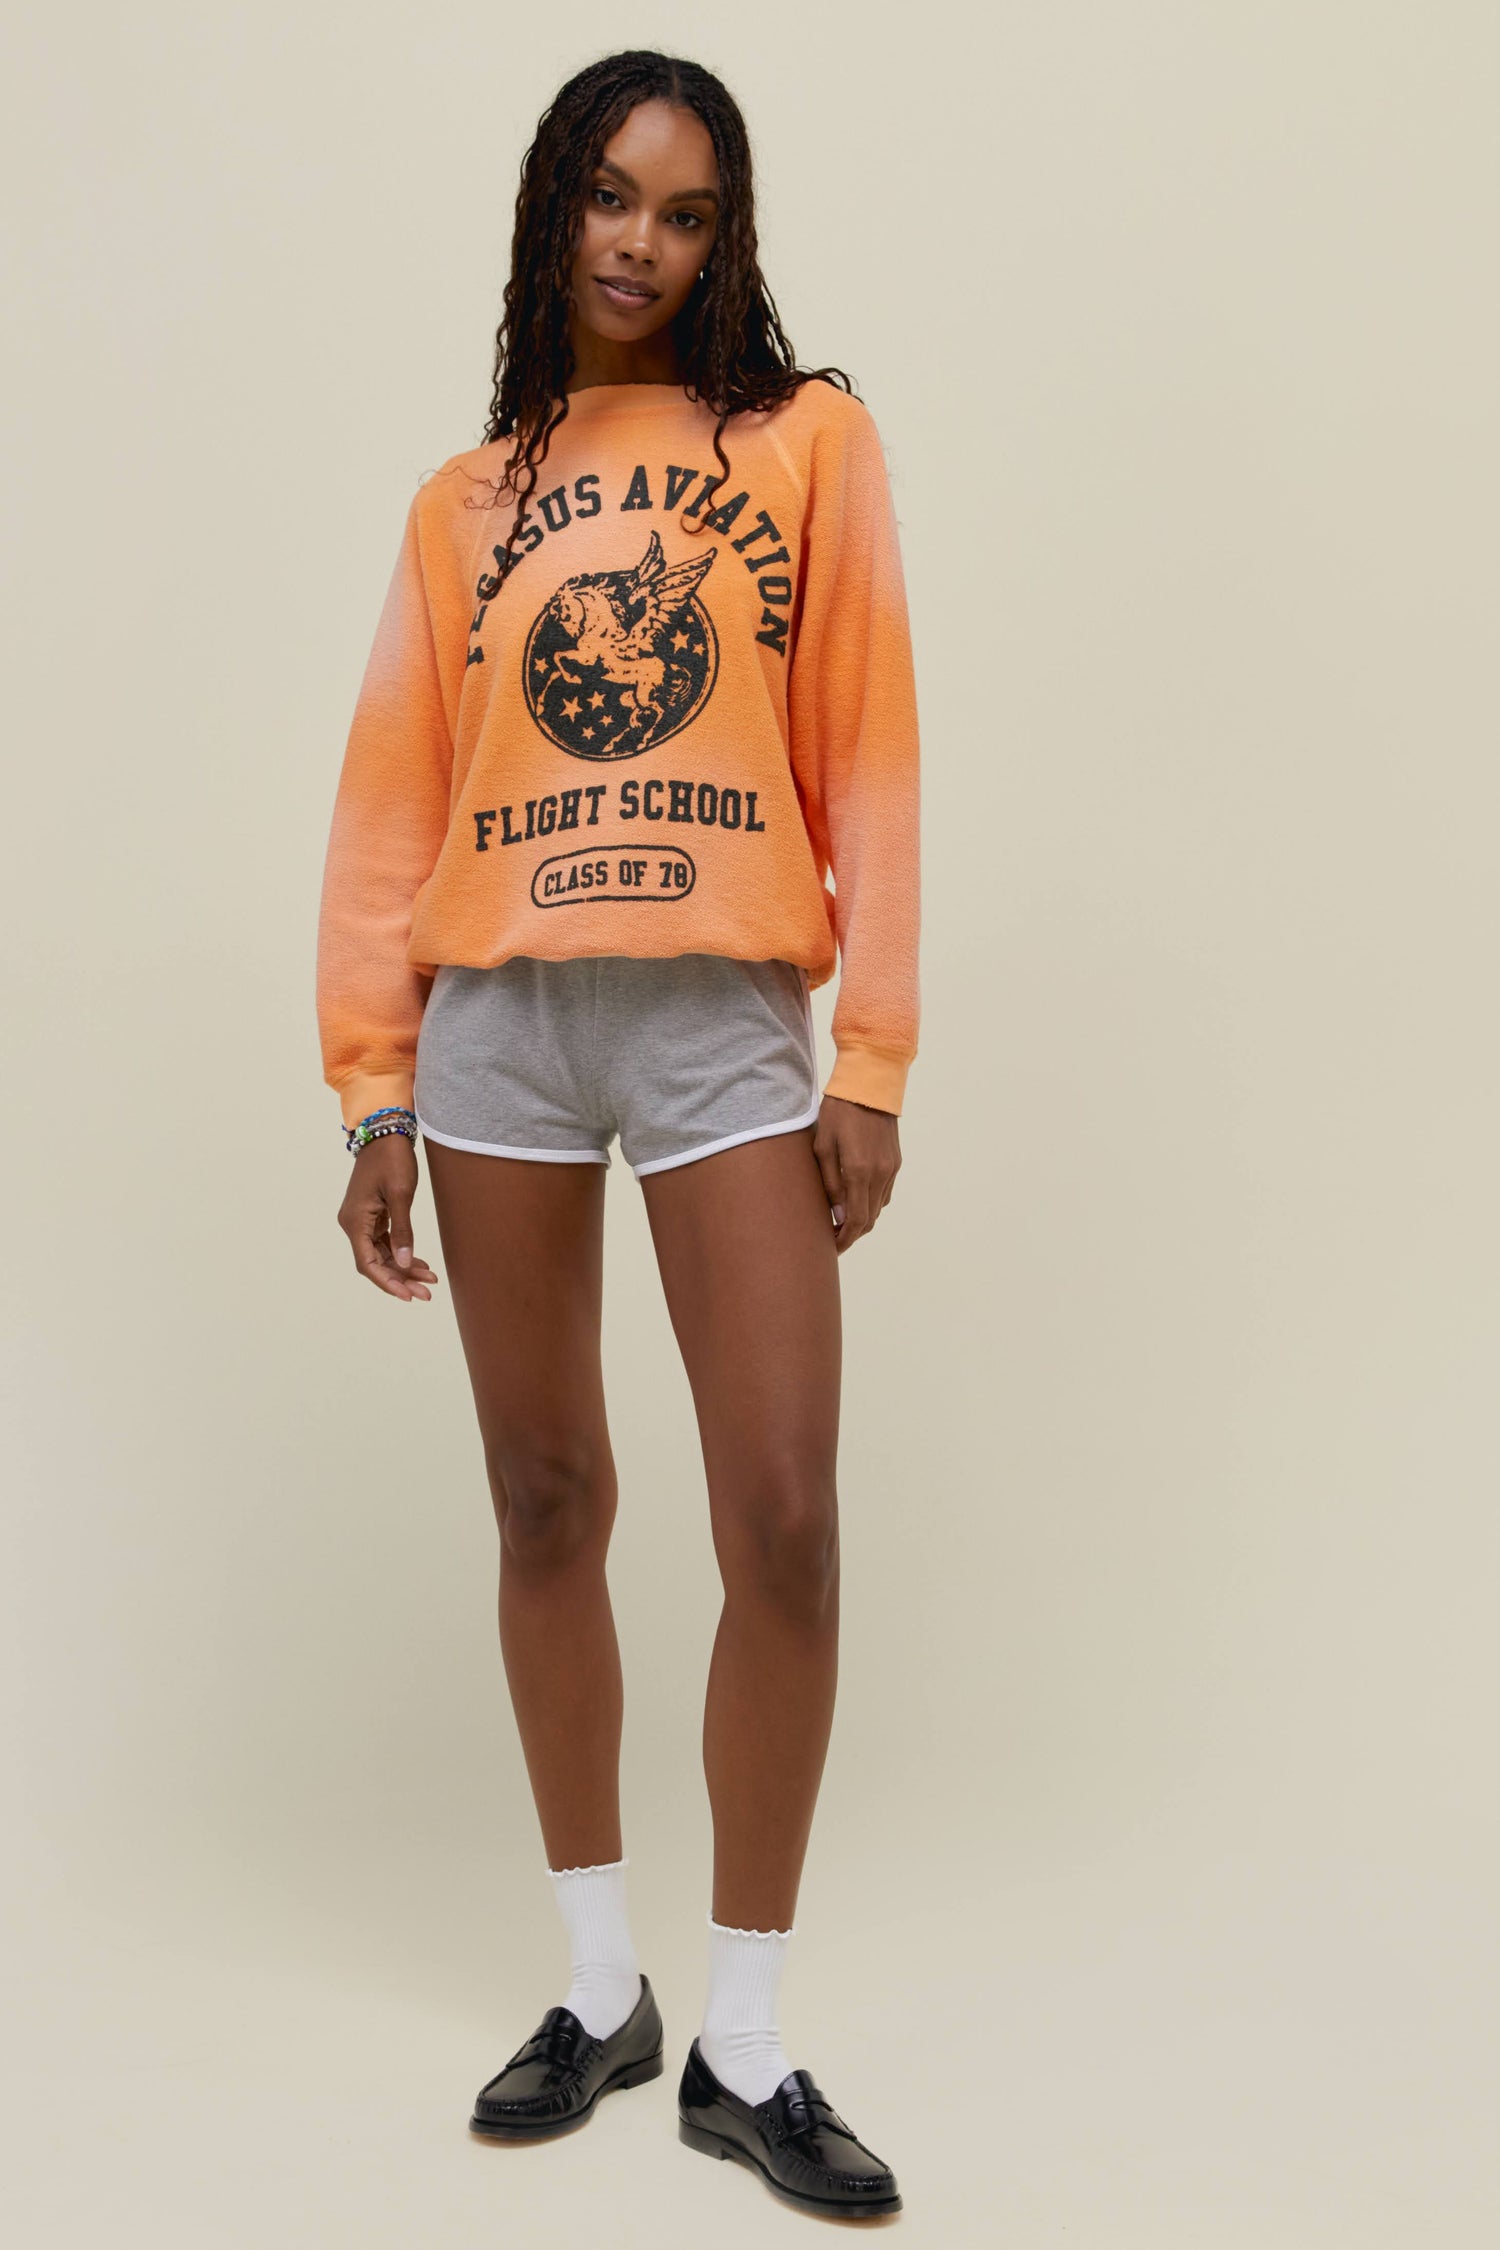 A model featuring a soft peach raglan crew stamped with "Pegasus Aviation Flight School" and a graphic of a pegasus on the center.